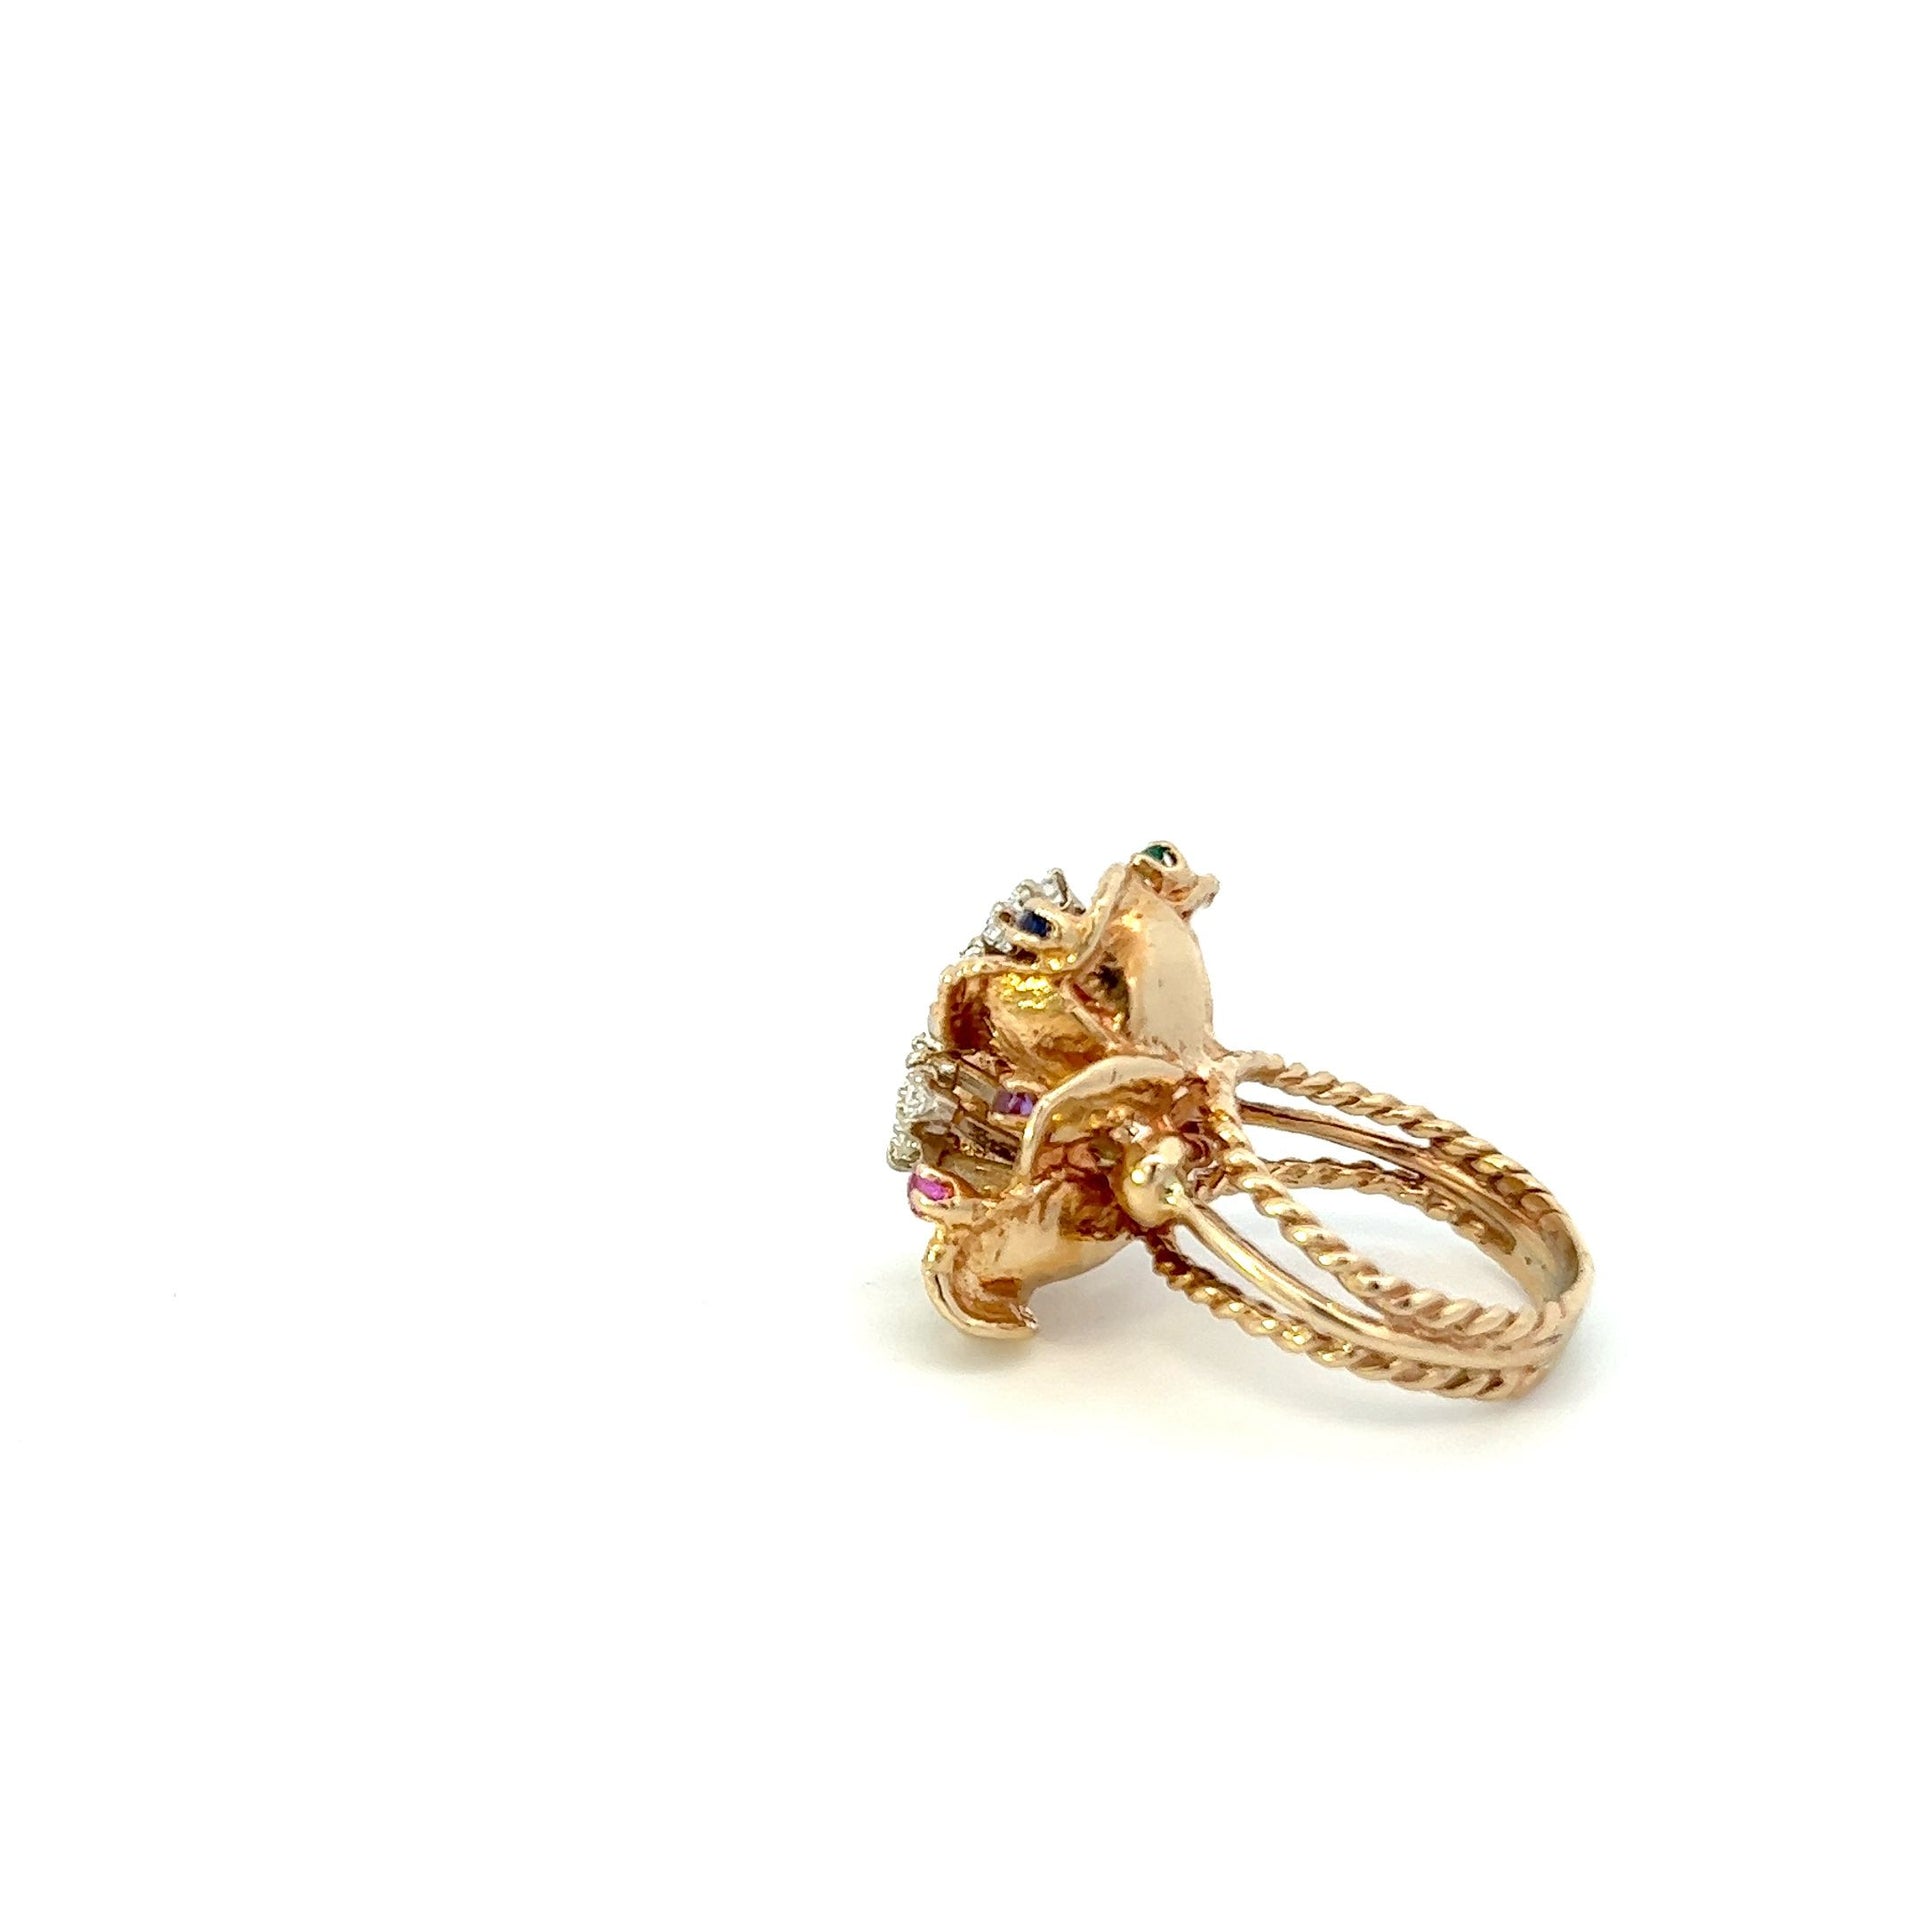 ESTATE 14KT YELLOW GOLD RETRO ERA FLORAL CLUSTER FLOATING DIAMOND AND MULTI COLOR GEM STONES RING.